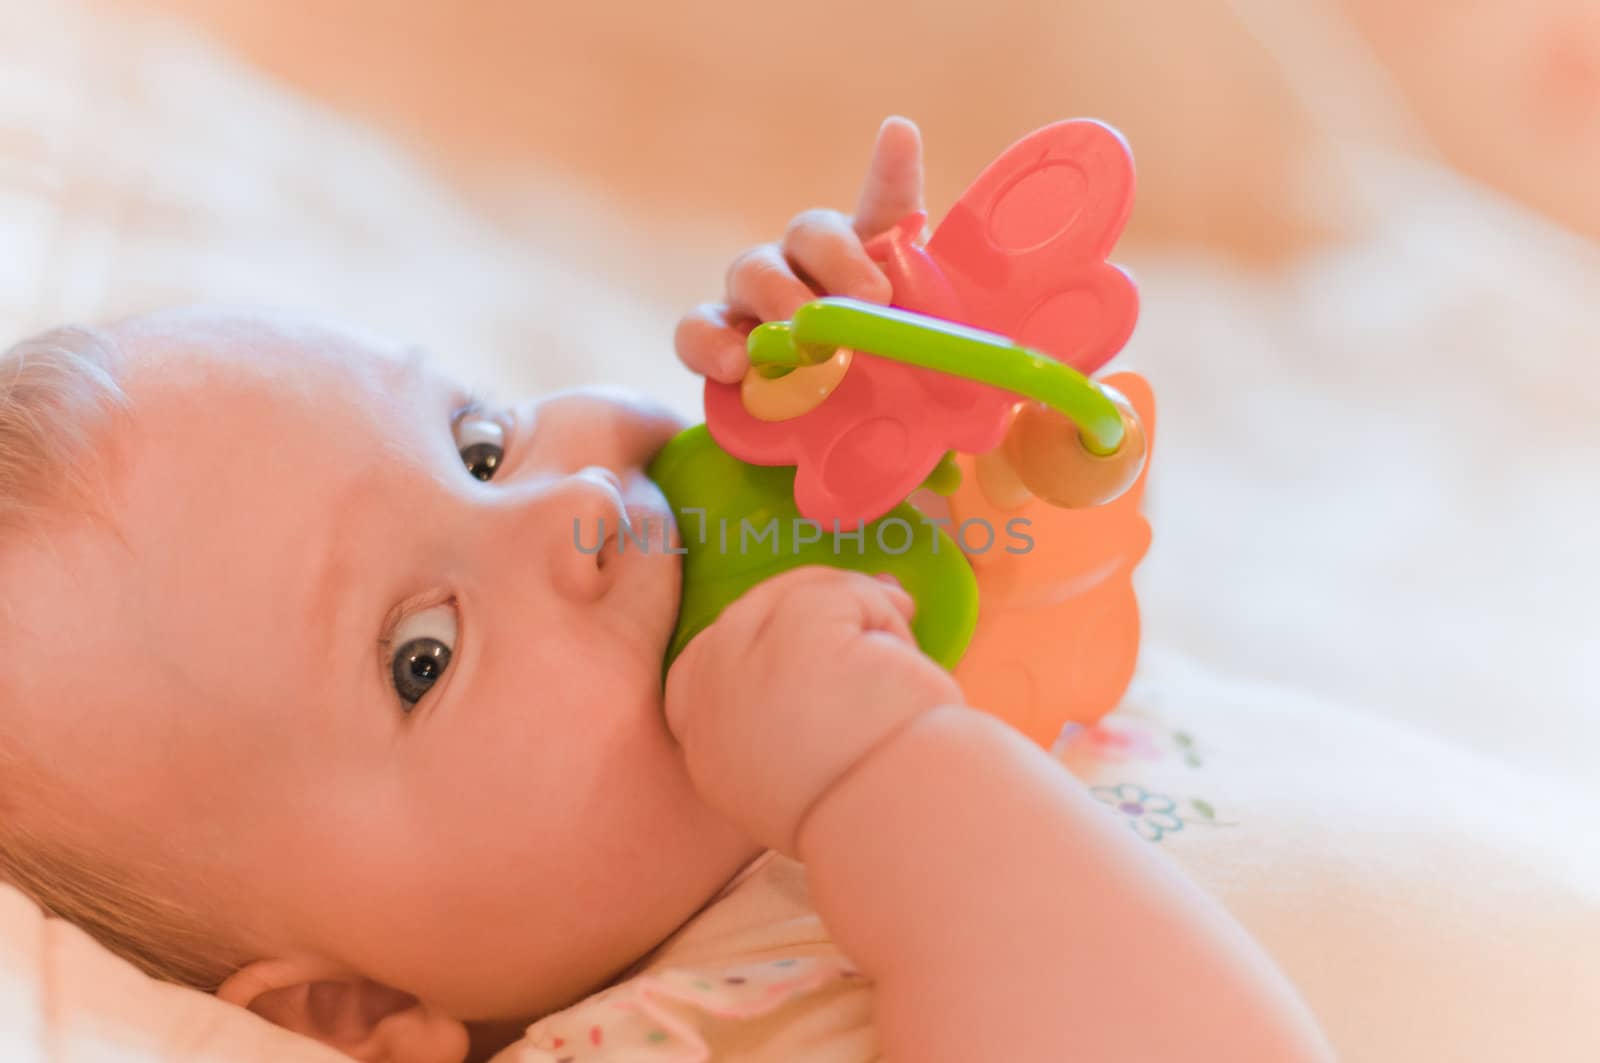 Closeup portrait of baby playing with toy